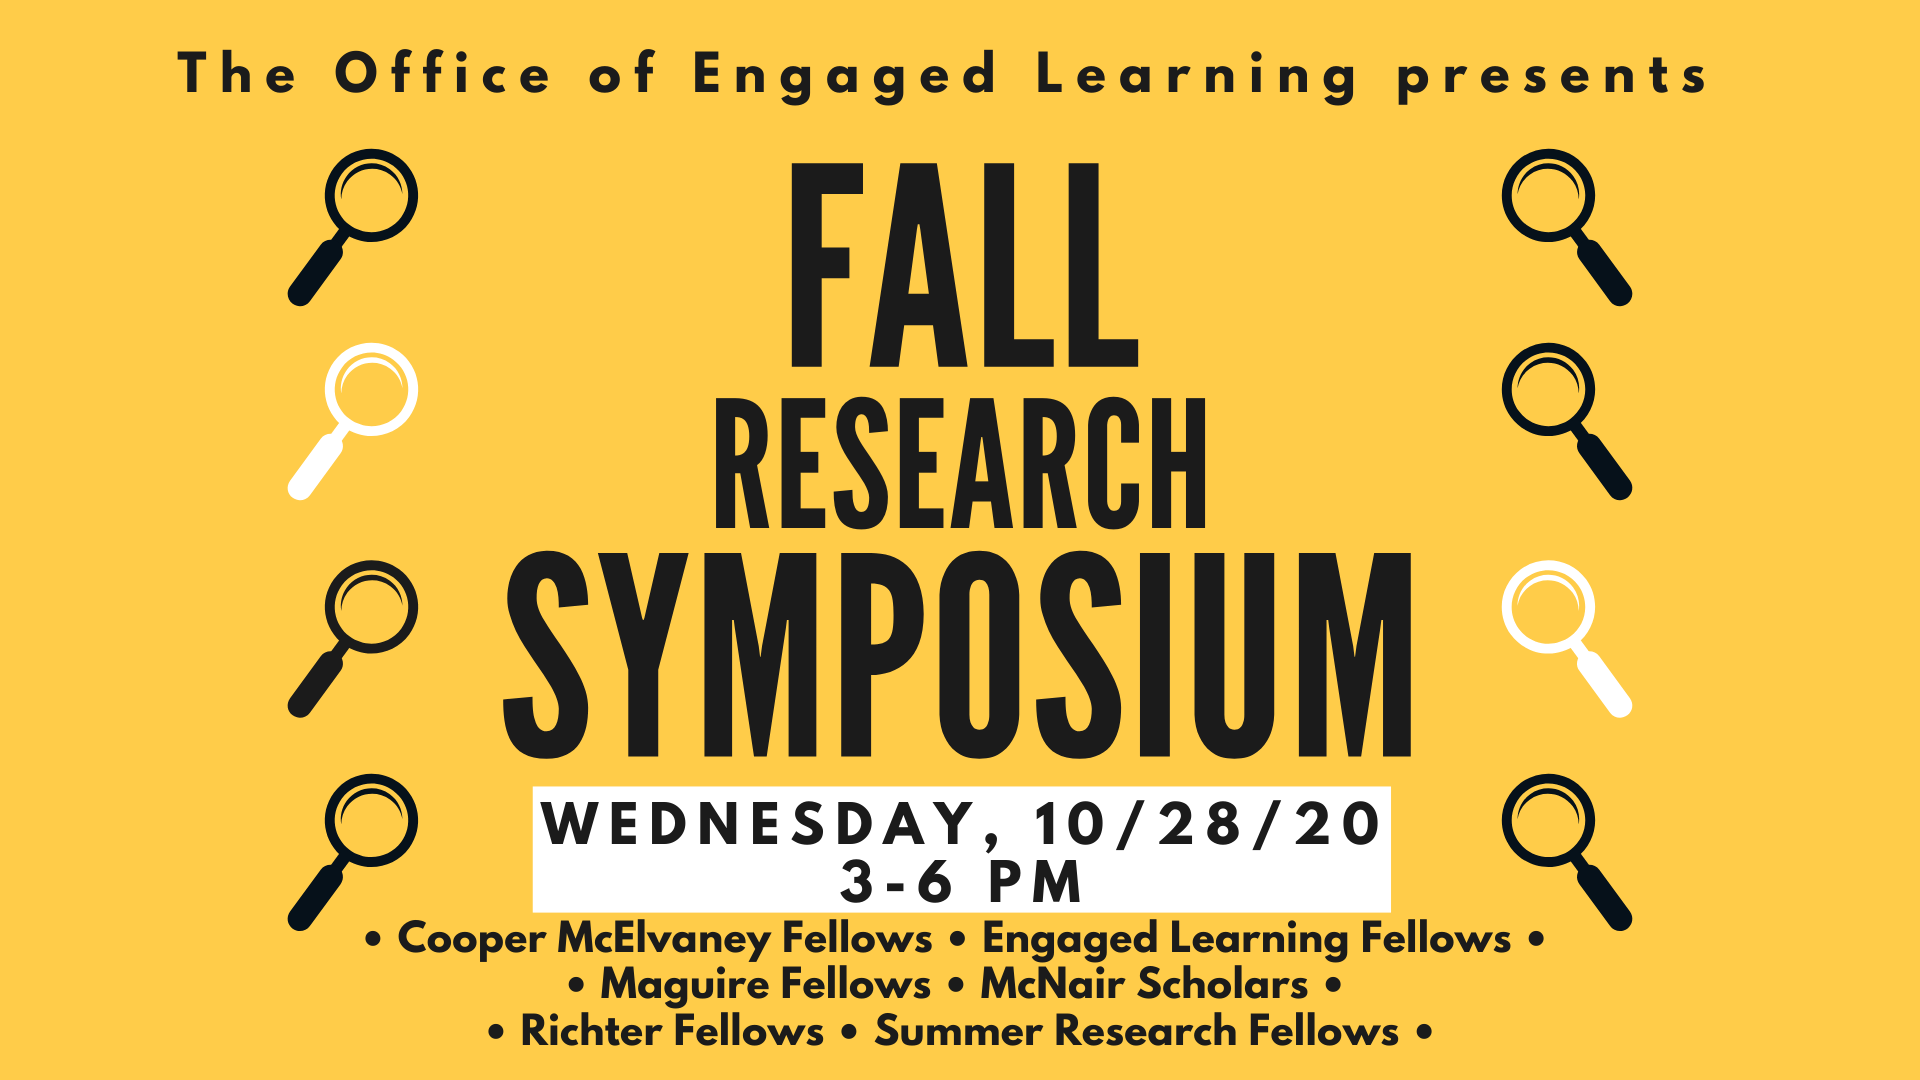 Flyer for the 2020 Fall Research Symposium. Wednesday 10/28/20, 3-6pm in Hughes-Trigg Student Center